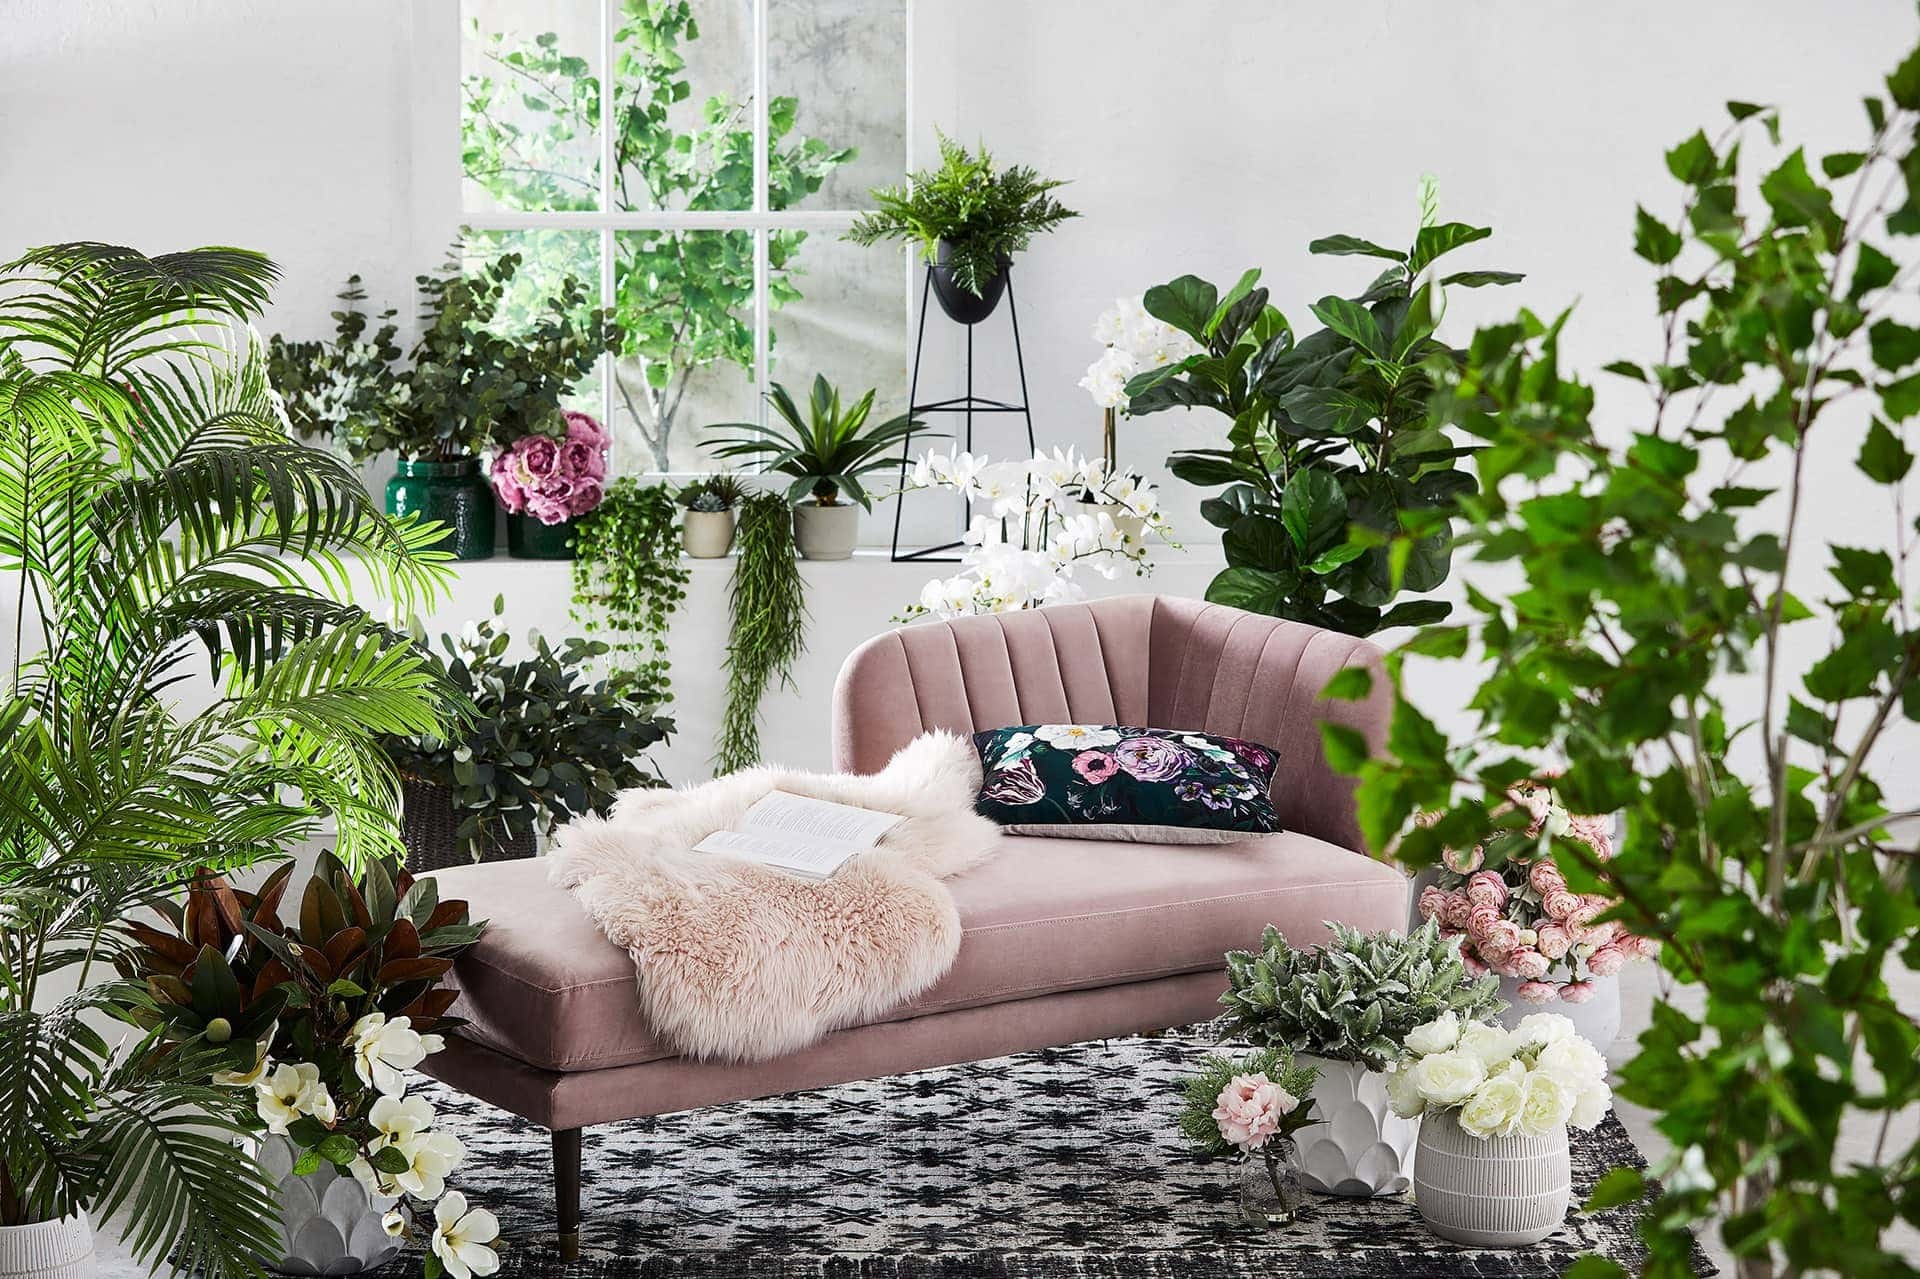 adairs fake plants and flowers around pink velvet daybed